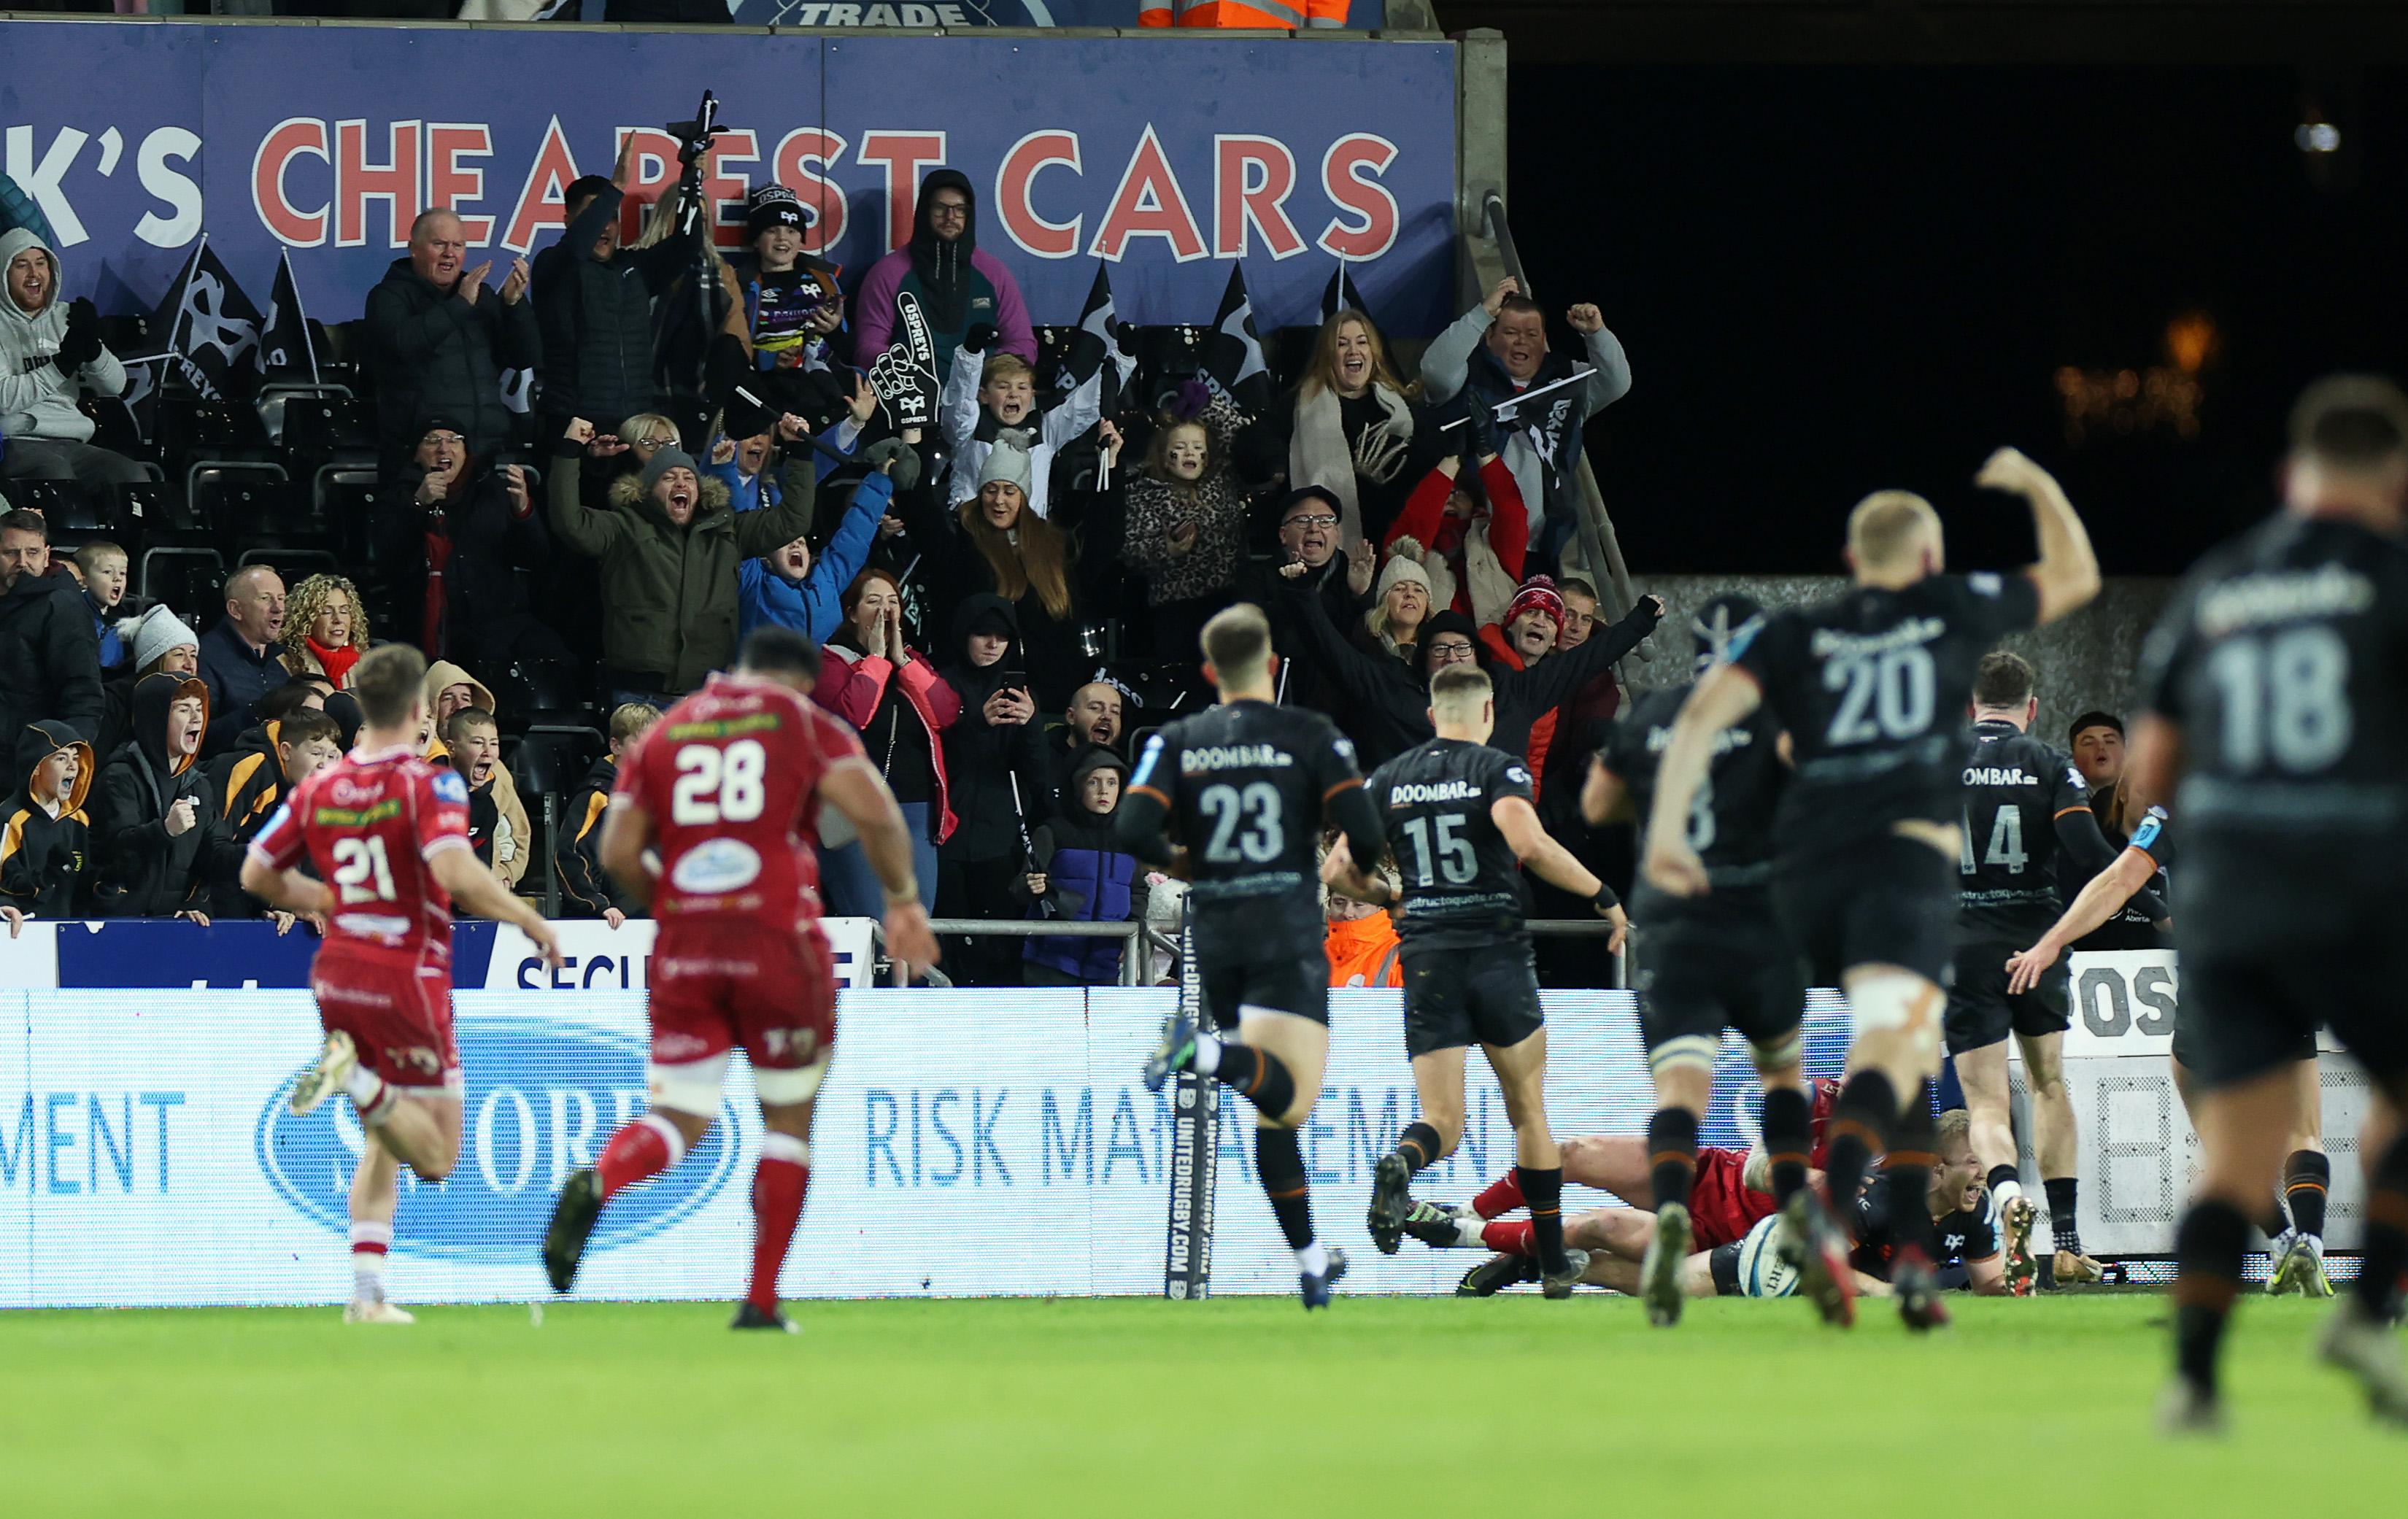 Ospreys celebrate a score over rivals Scarlets at the Swansea.com stadium